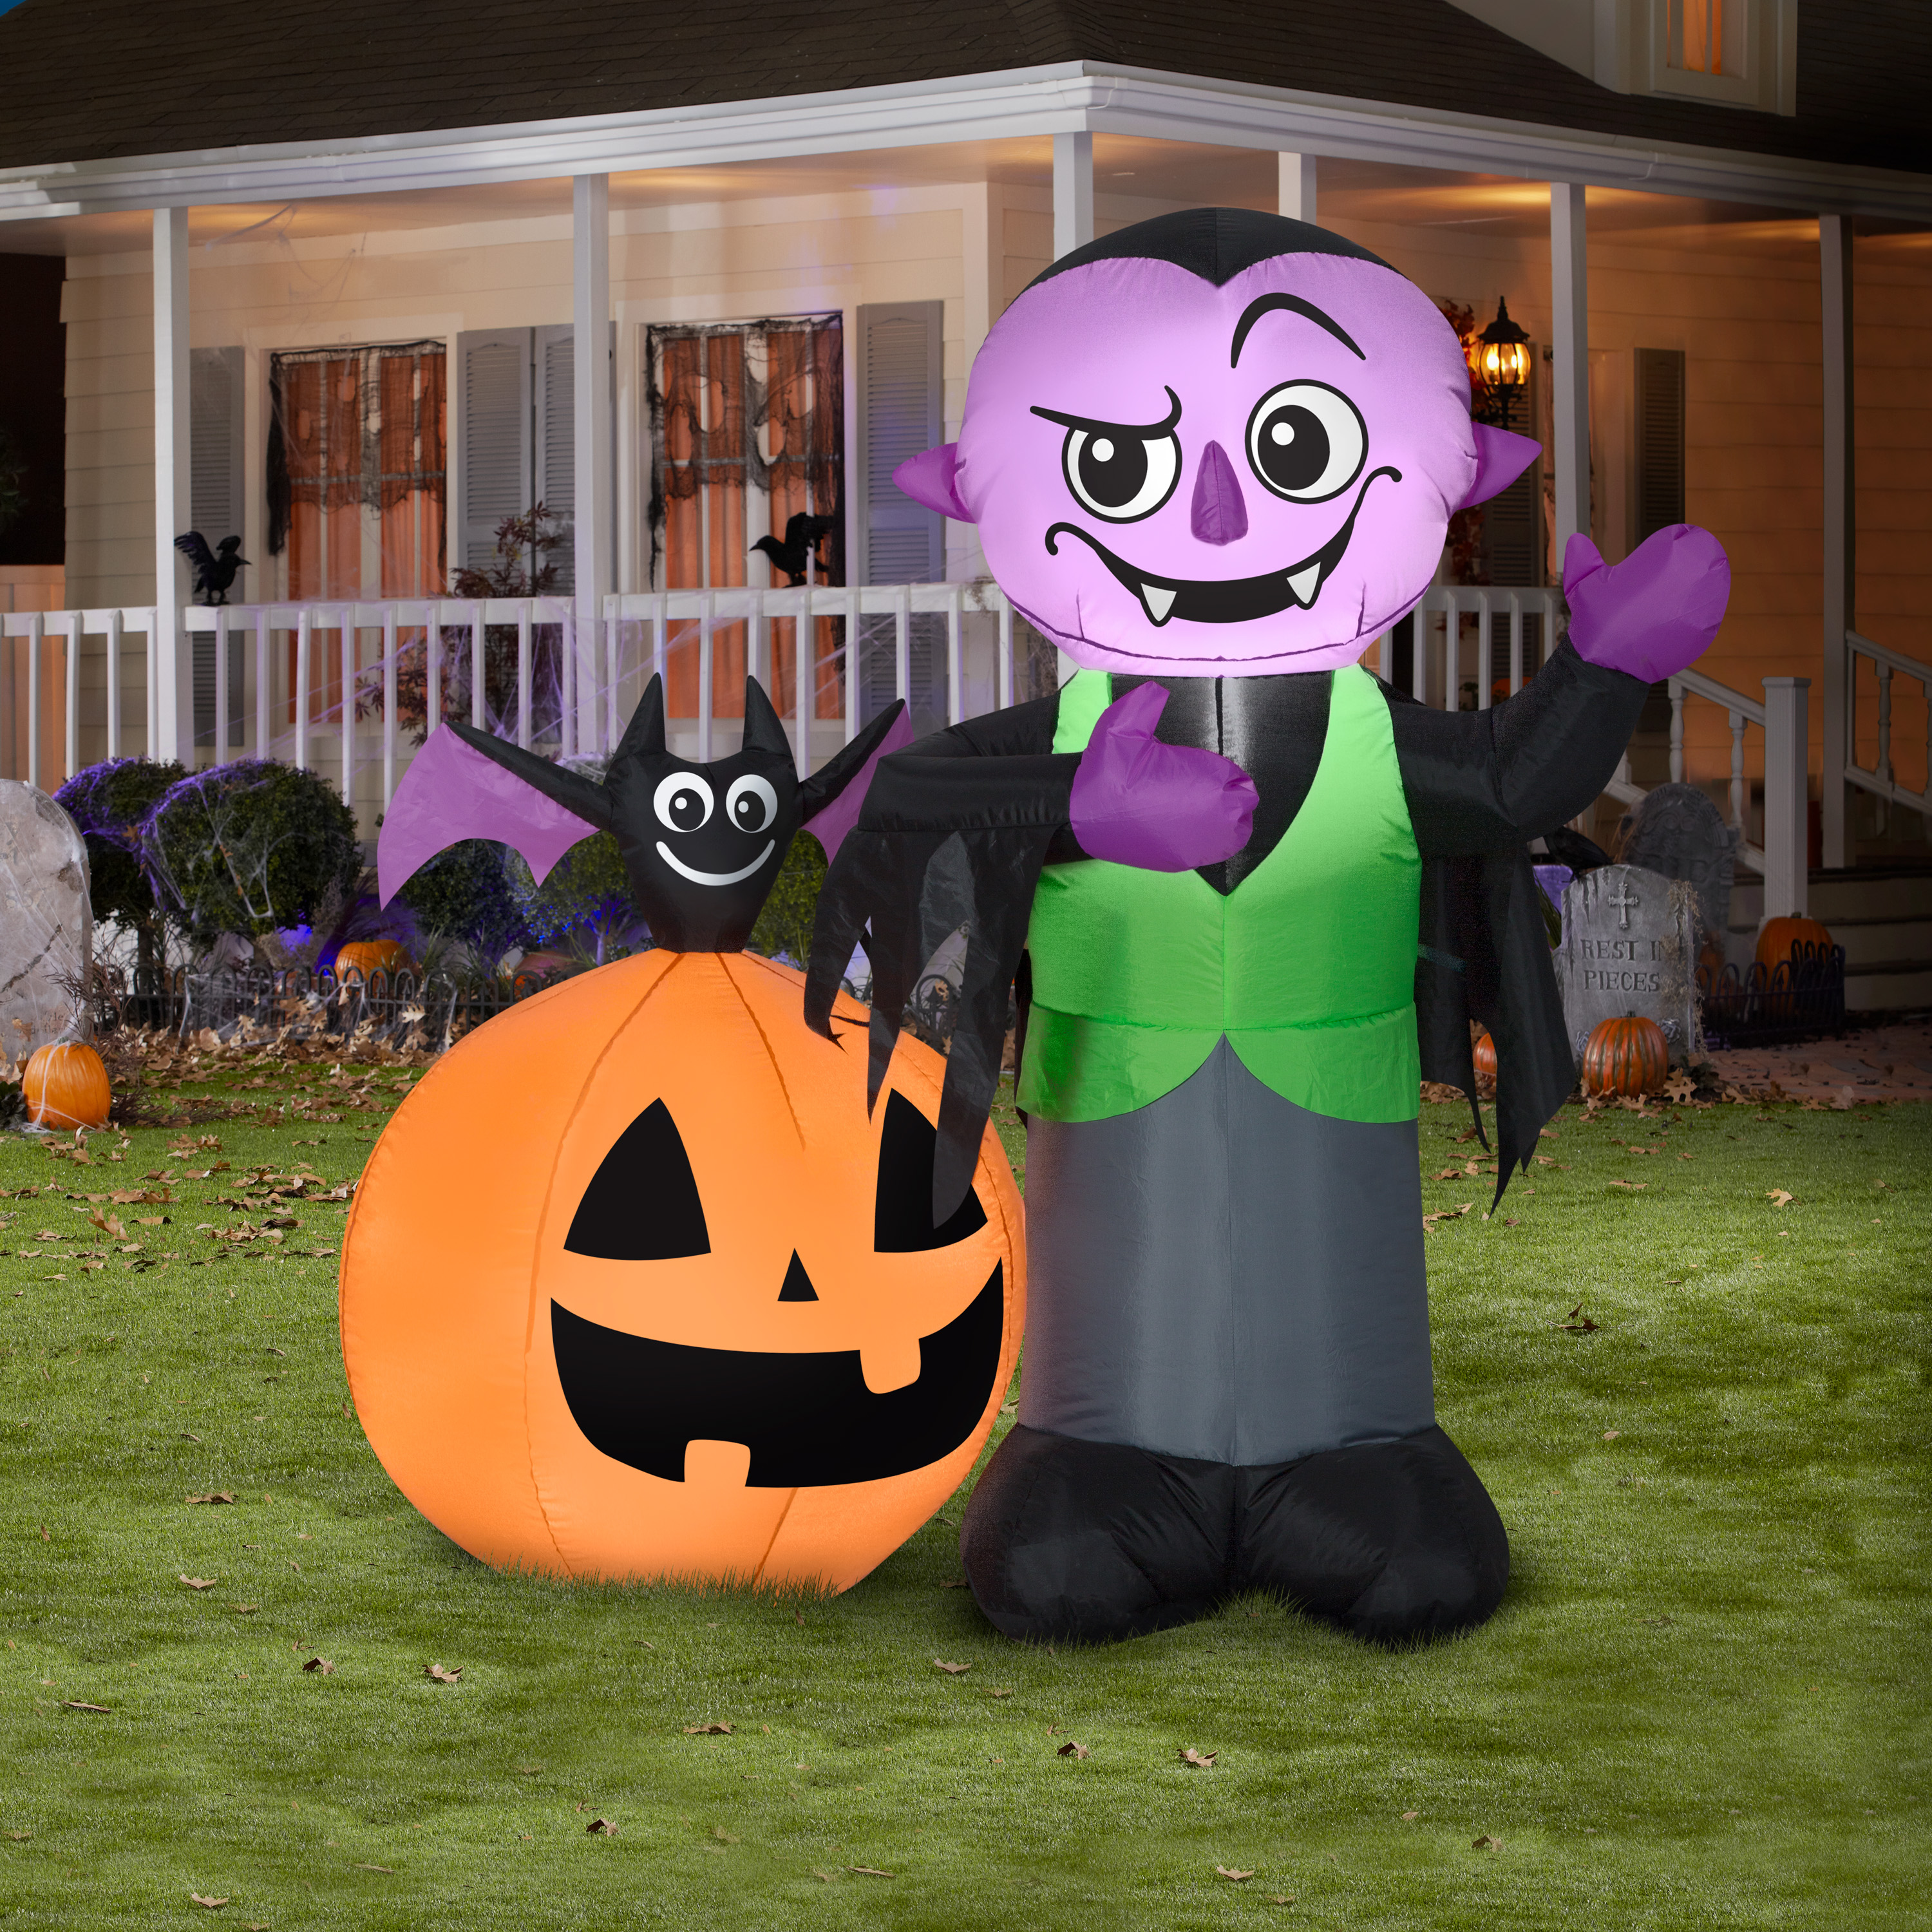 Halloween Airblown Inflatable Vampire, Bat, and Jack O Lantern Scene by Gemmy Industries - image 2 of 2